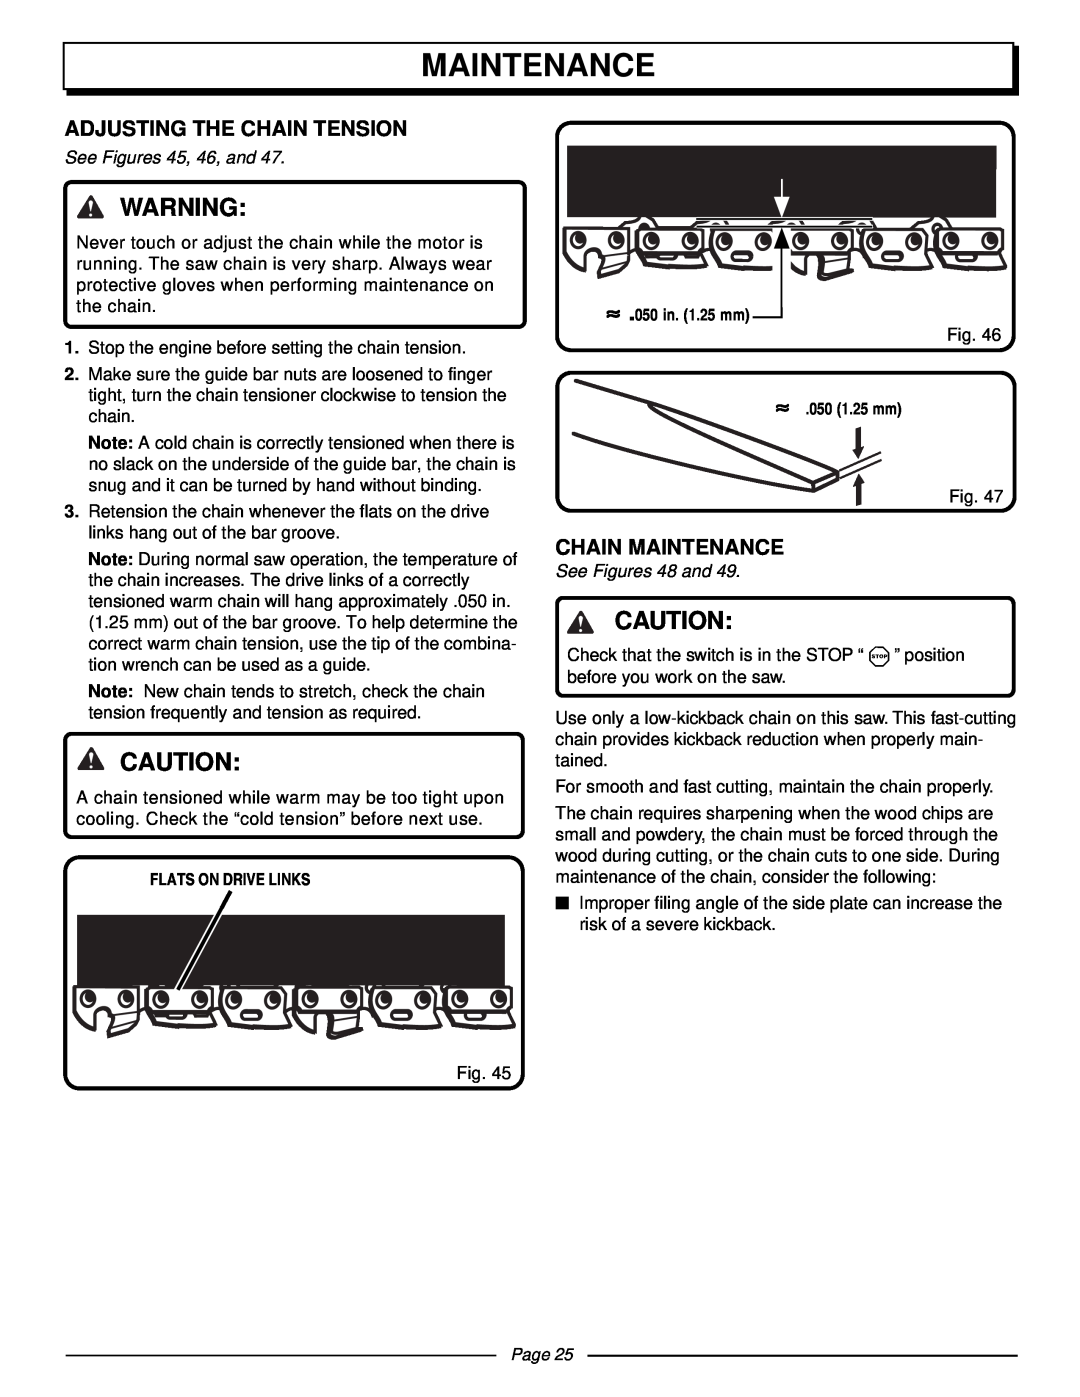 Homelite UT10510 manual Adjusting The Chain Tension, Chain Maintenance, See Figures 45, 46, and, See Figures 48 and, Page 